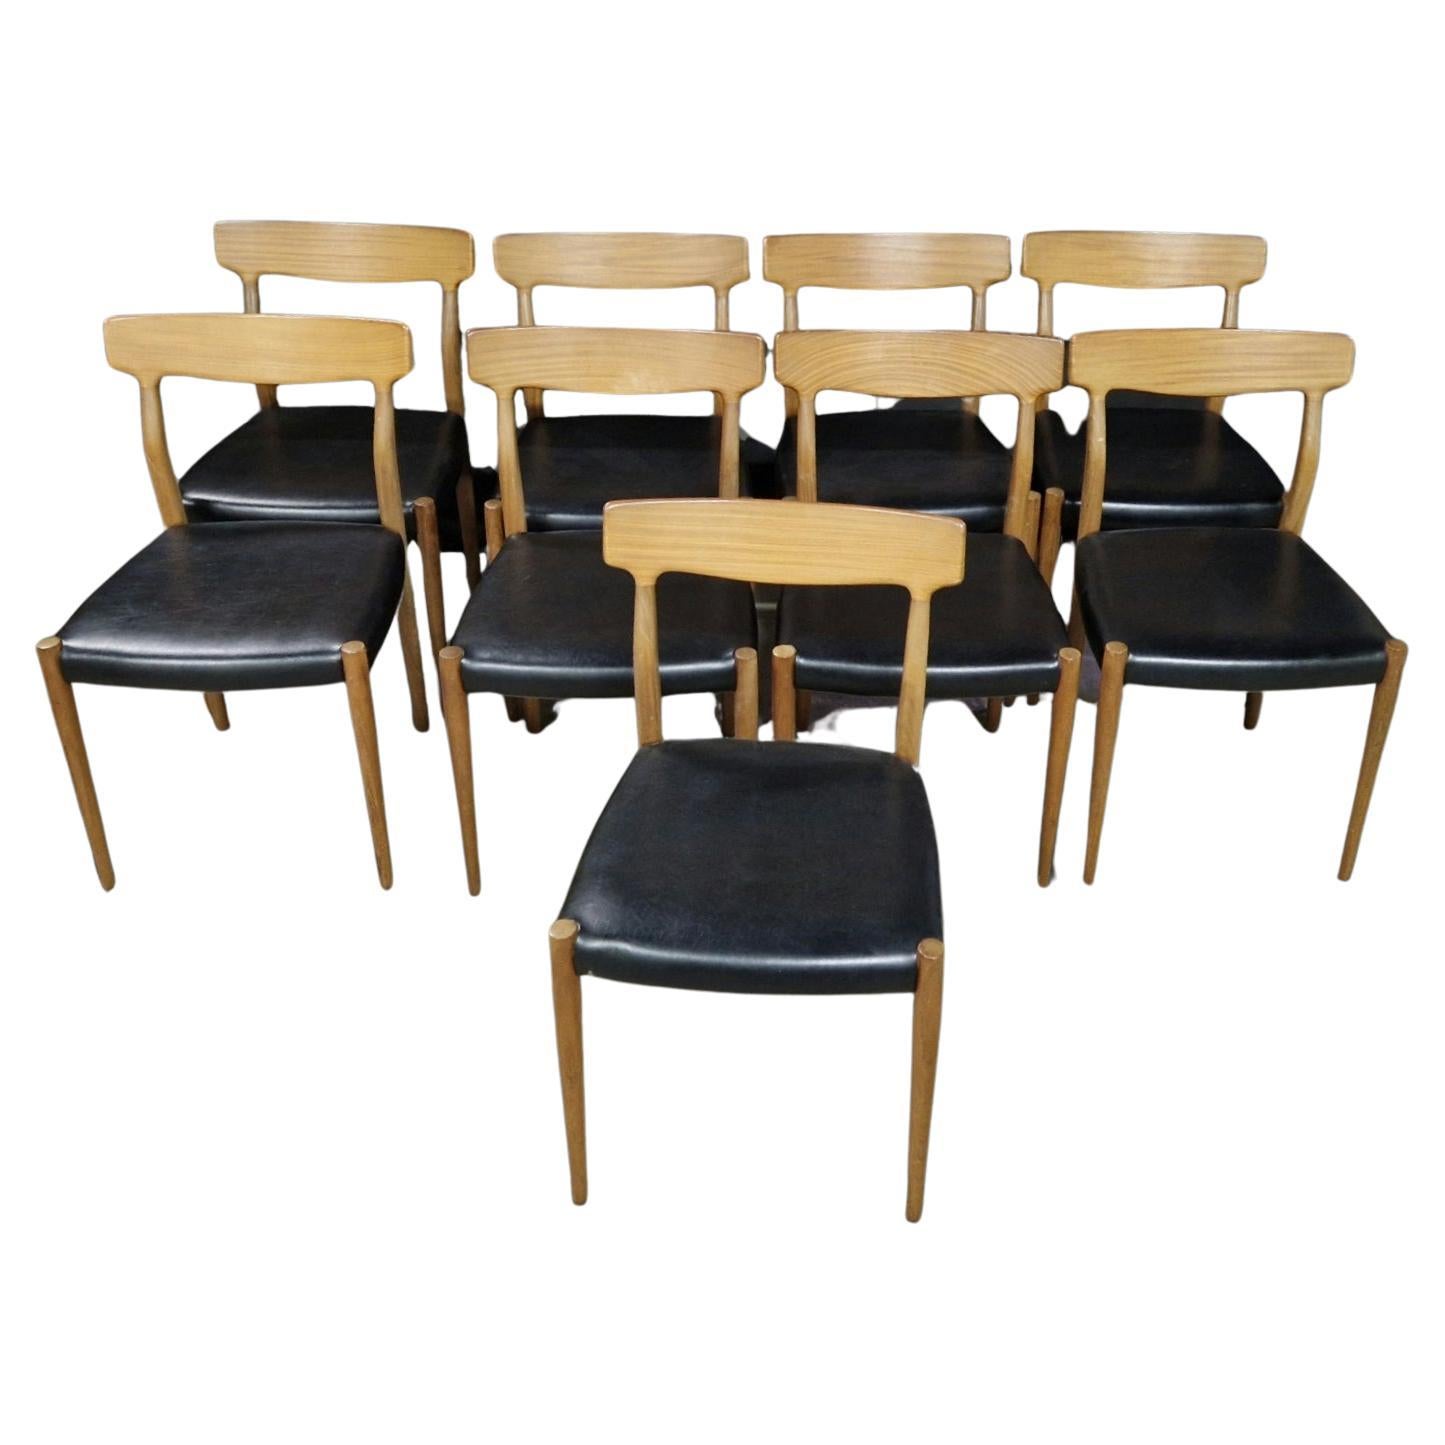 Mid century teak and vinyl dining chairs by Lübke, Germany 1960s